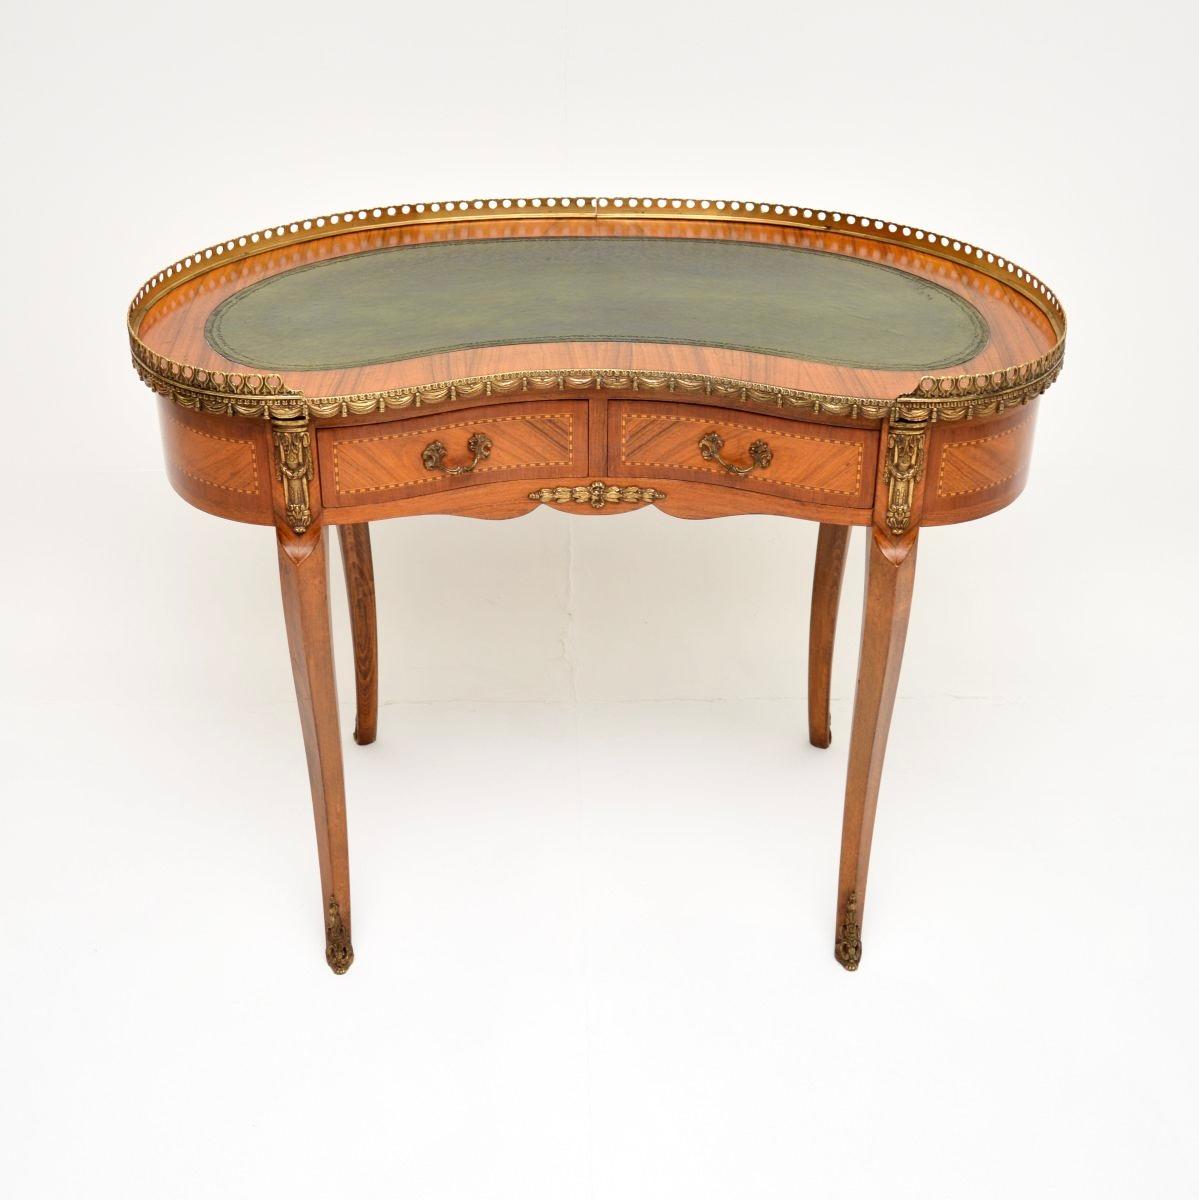 A stunning antique French kidney shaped leather top desk, dating from around the 1930’s period.

It is of fabulous quality, with a solid birch construction and contrasting veneers of various other woods. There are fine gilt bronze mounts throughout